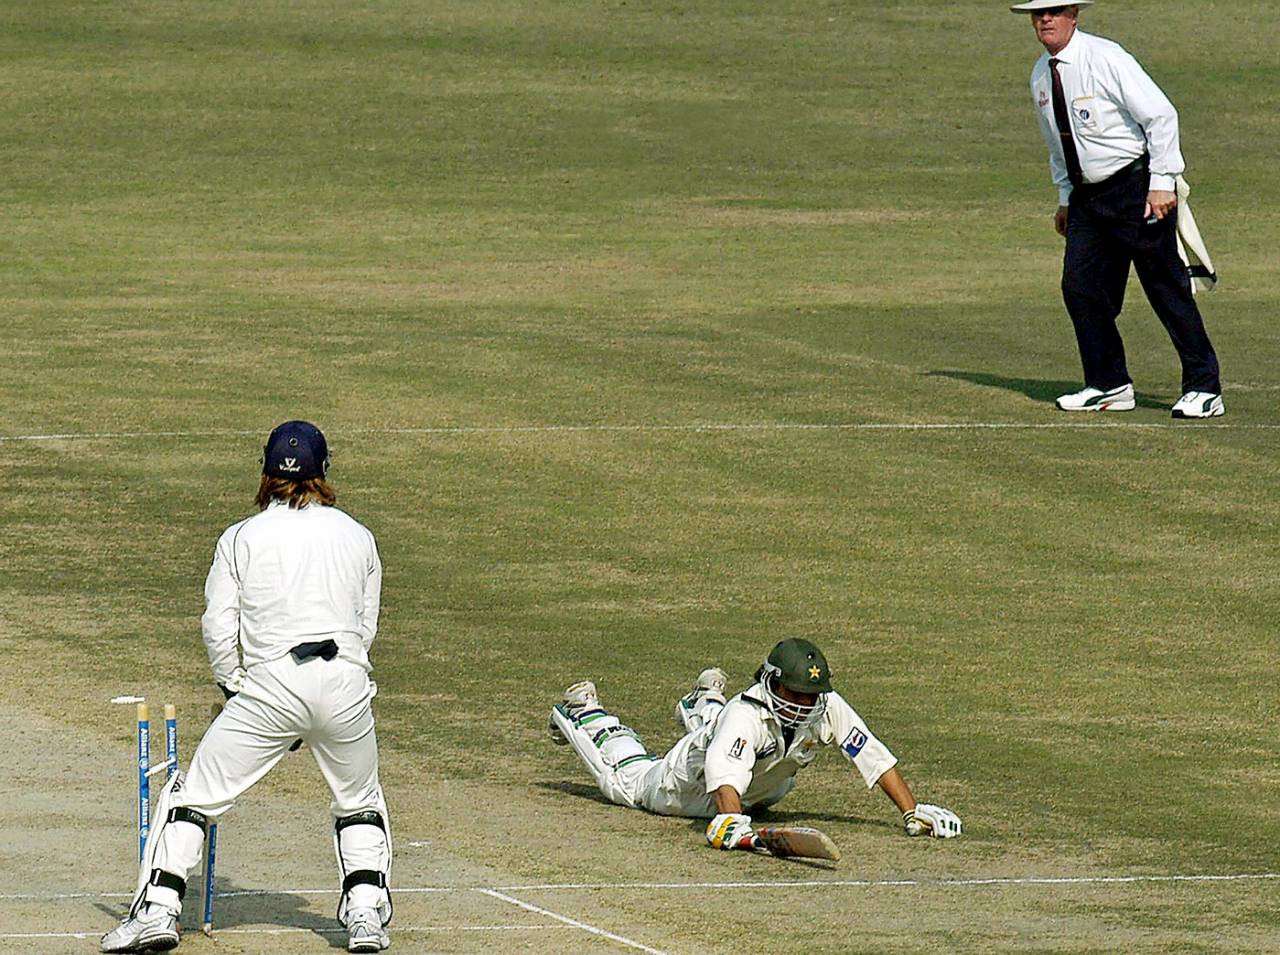 Younis Khan dives but is run out on 199, India v Pakistan, 1st Test, Lahore, 2nd day, January 14, 2006